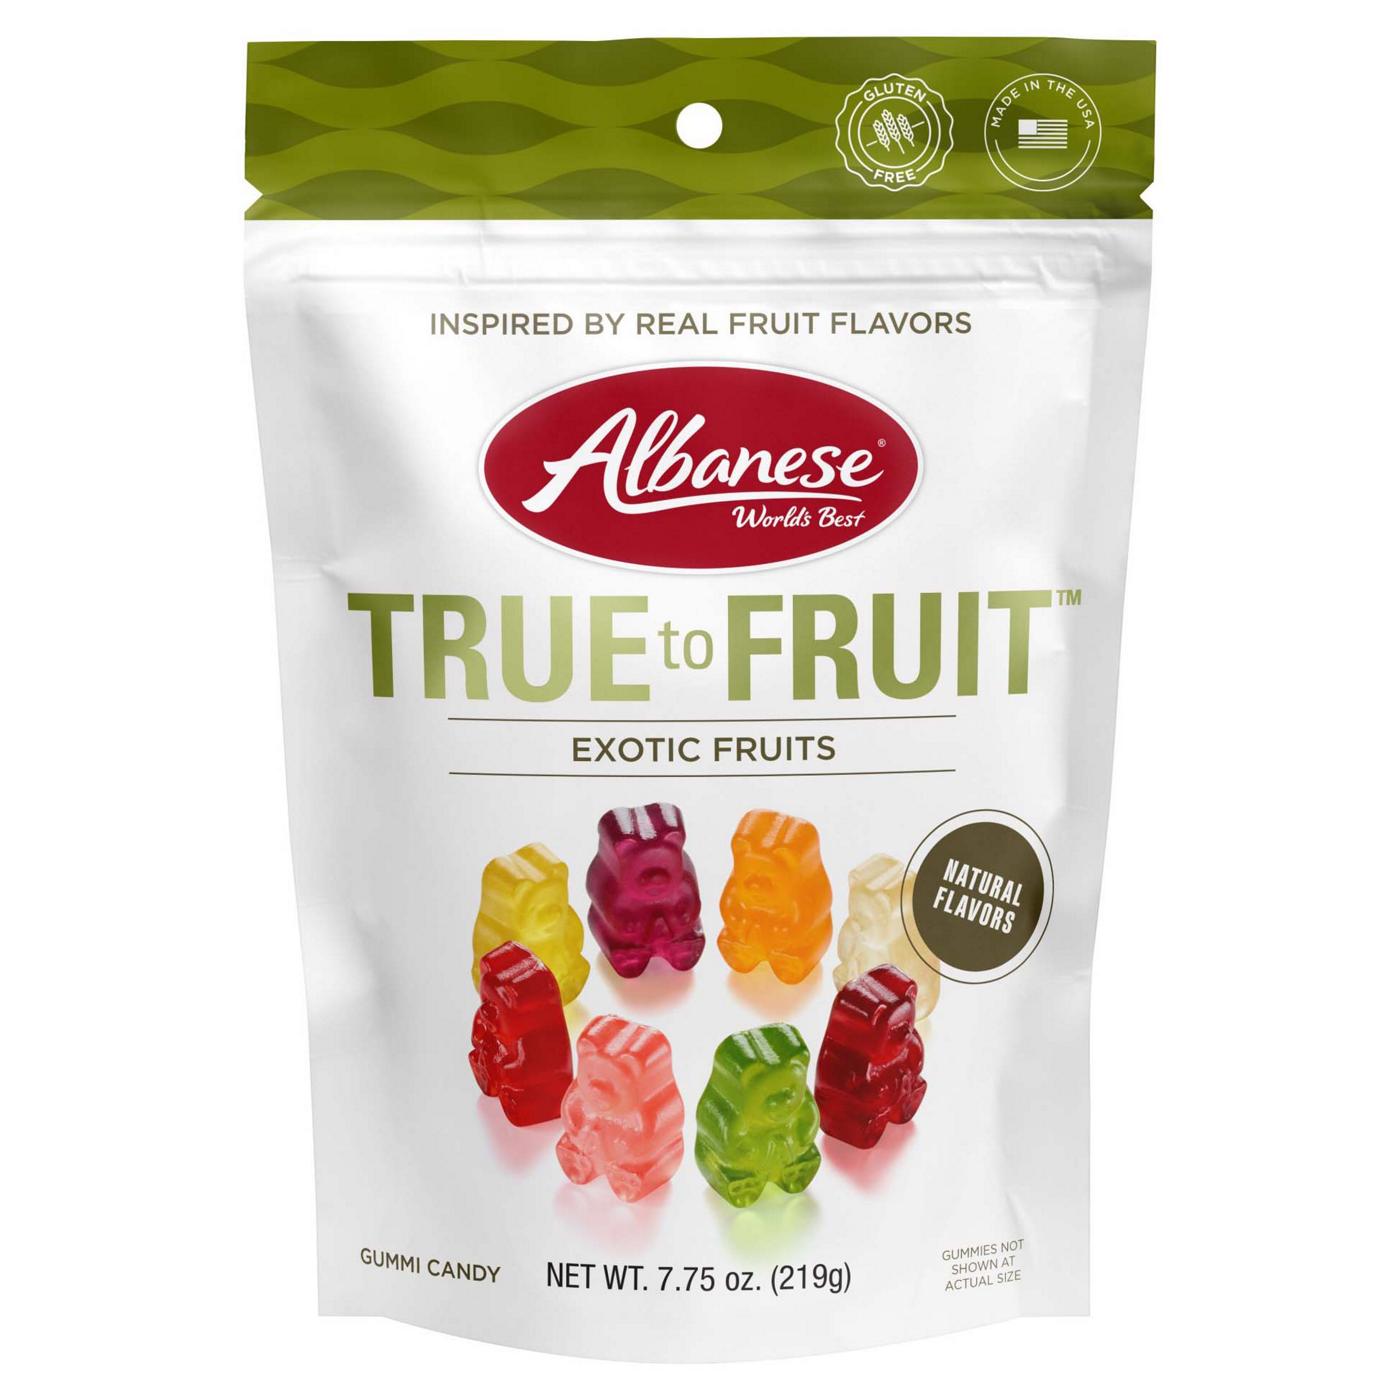 Albanese World's Best True to Fruit Exotic Fruits Flavor Gummi Bears; image 1 of 2